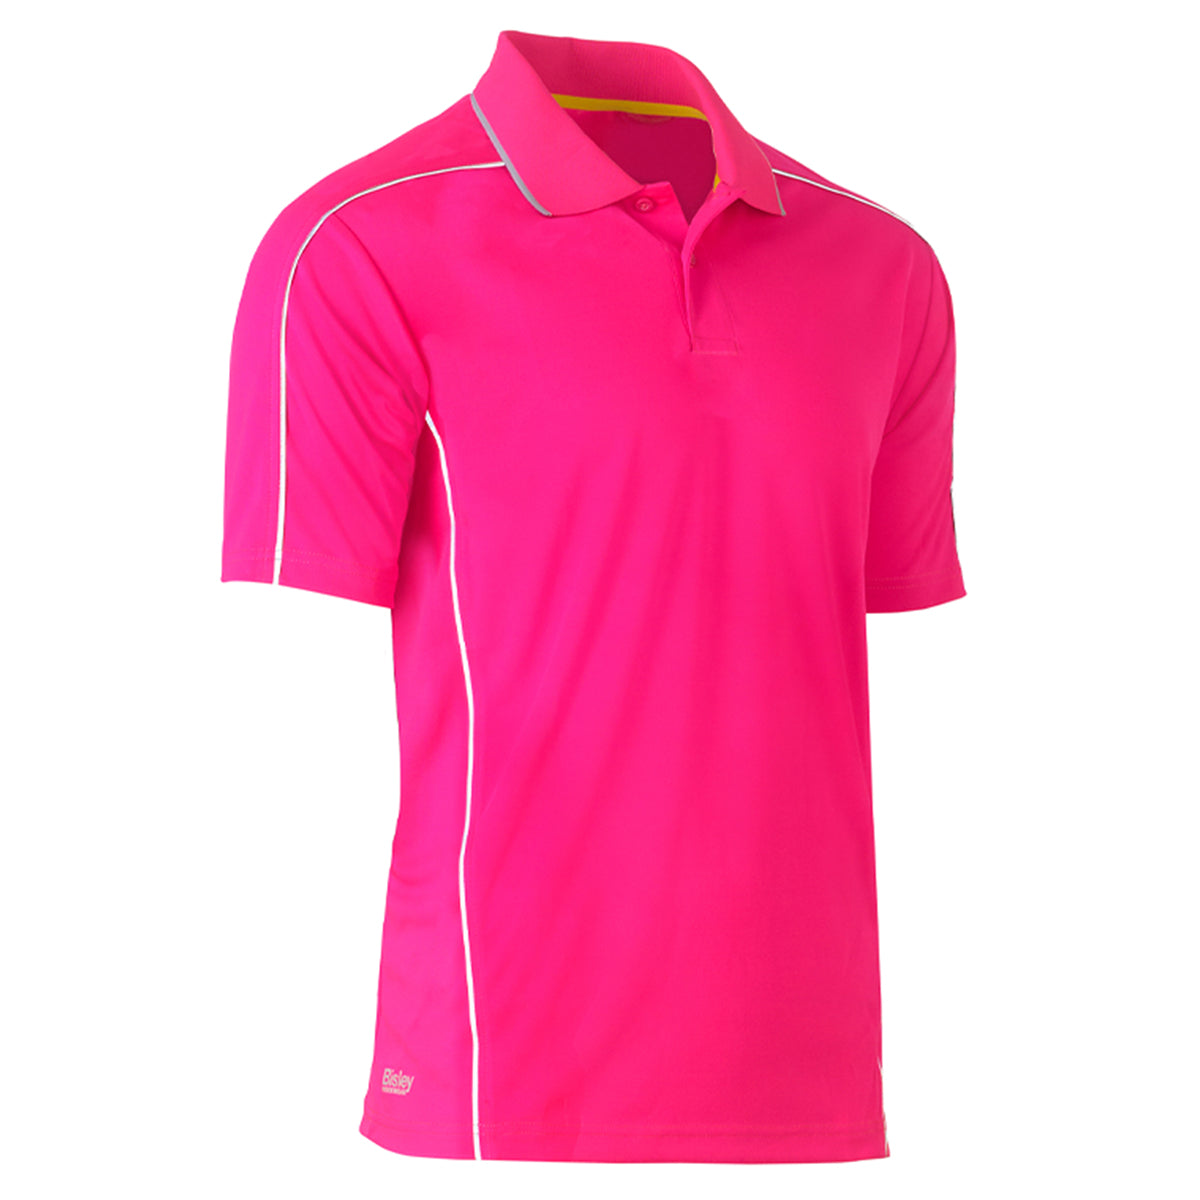 Bisley - Cool Mesh Polo with Reflective Piping Short Sleeve (Pink)